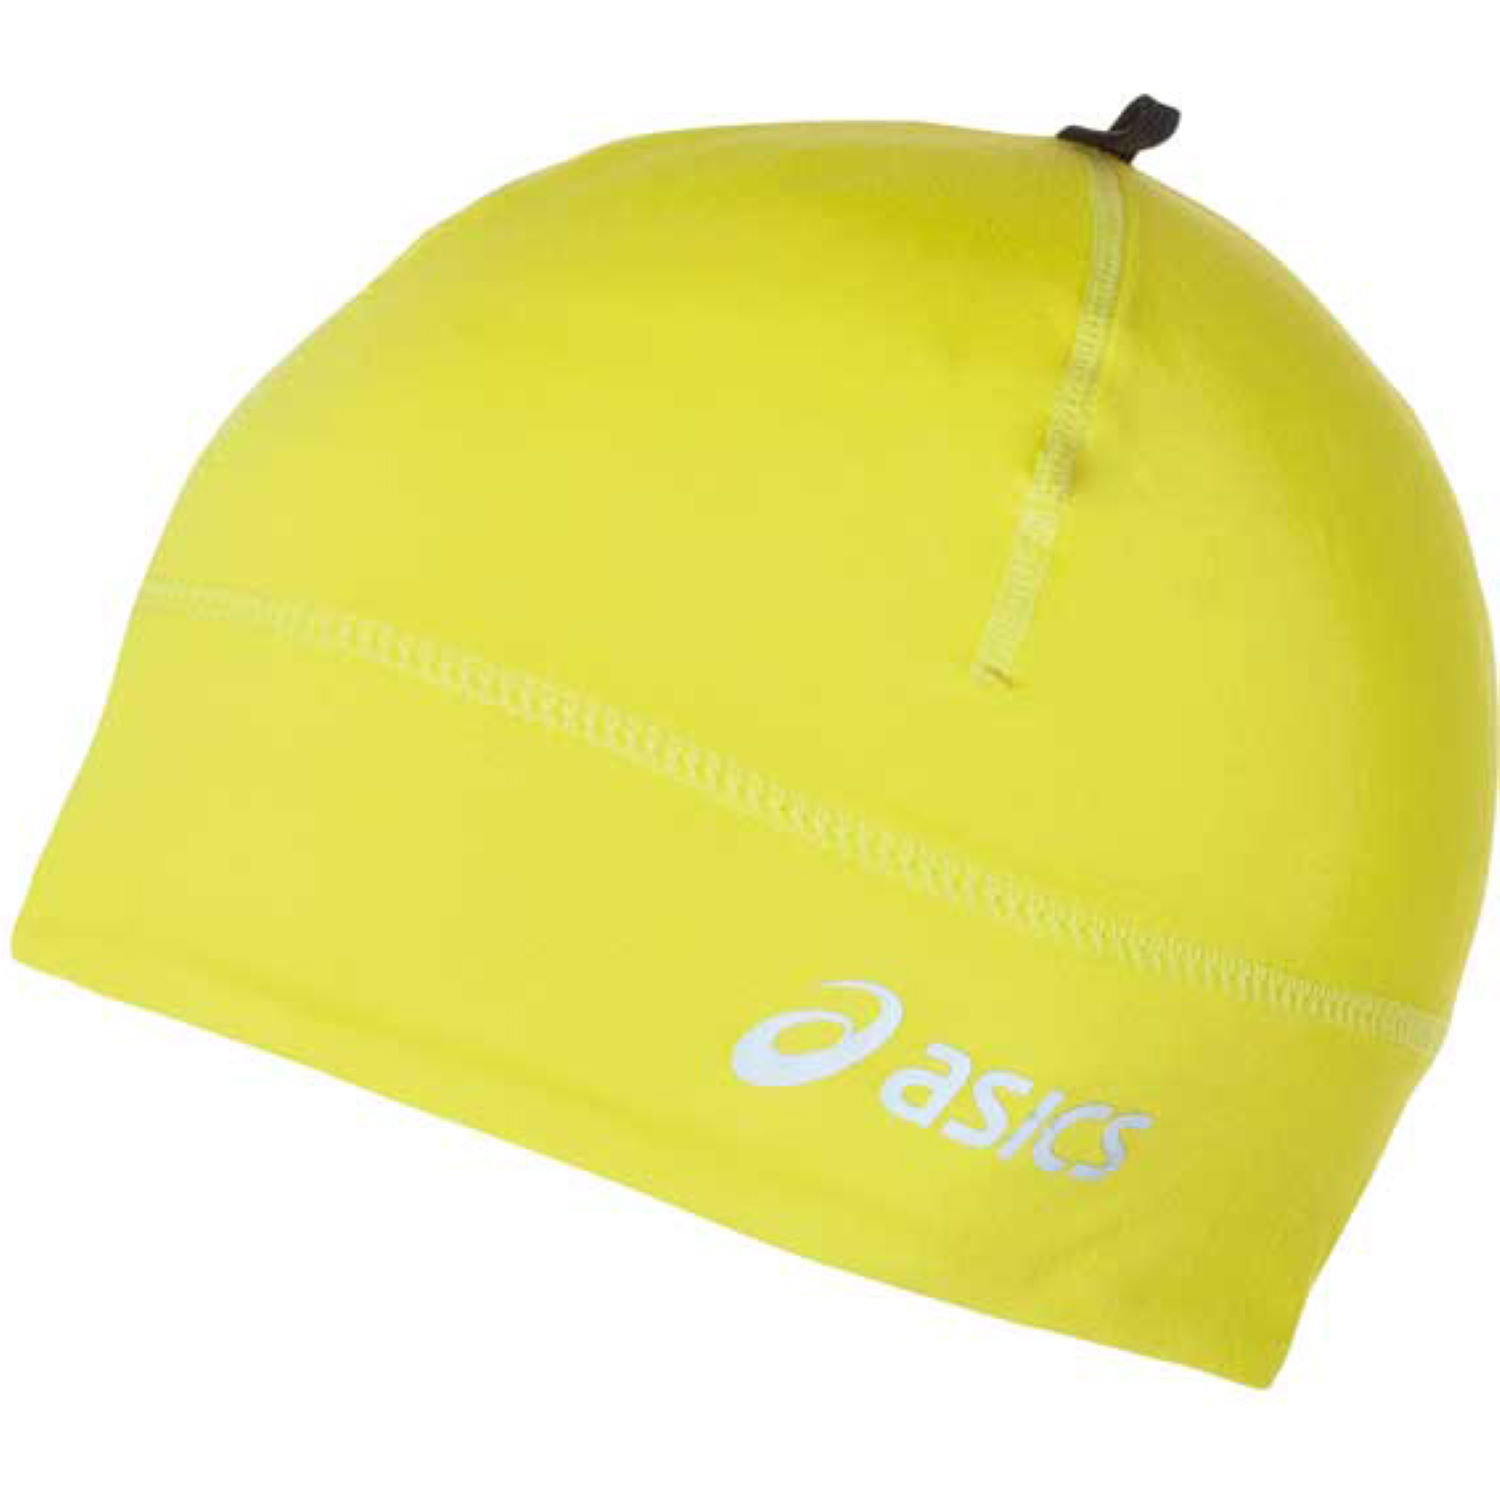 Asics Thermal Hat Safety Yellow 58cm